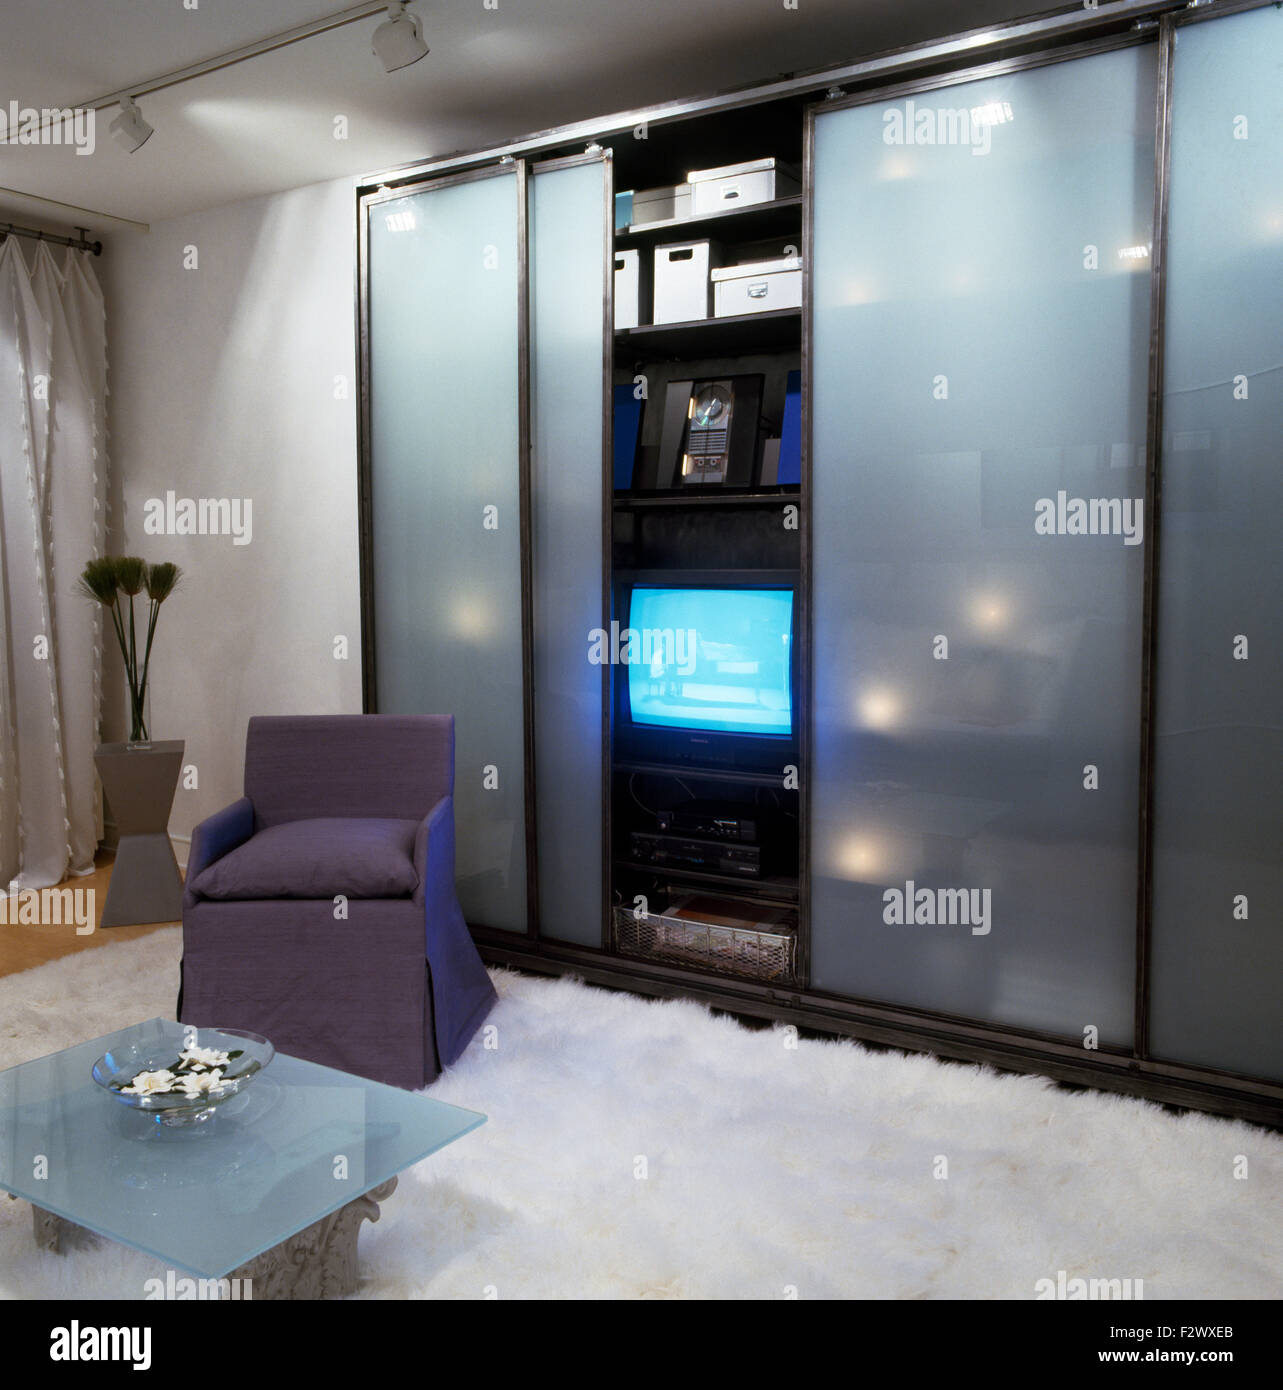 Opaque Glass Sliding Doors On Wardrobe With Television In